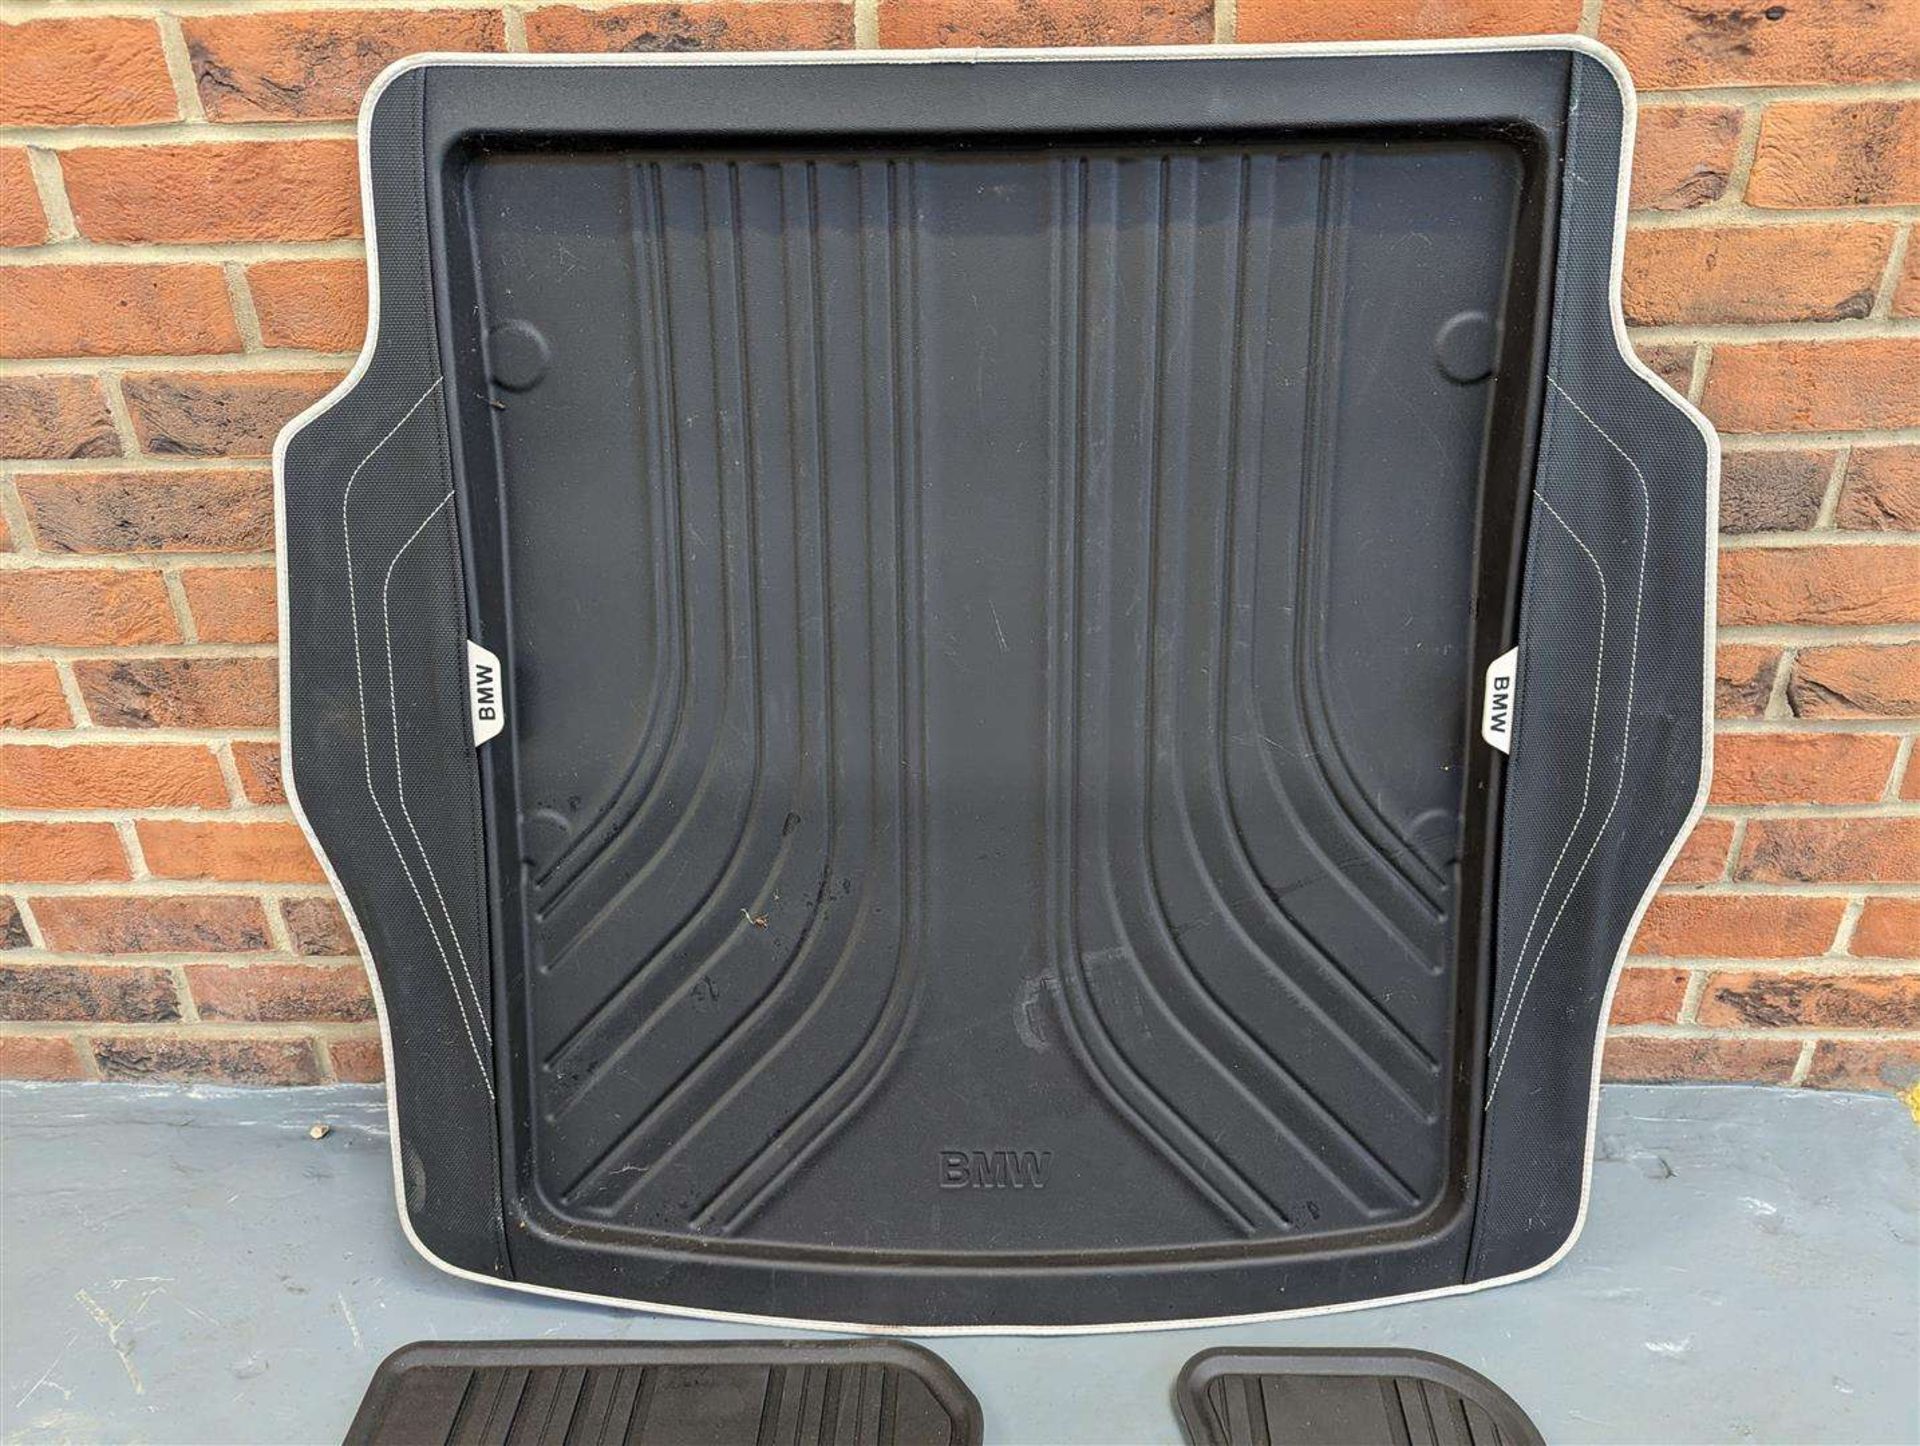 NEW BOOT TRAY AND FRONT RUBBER MATS FOR BMW F22 COUPE MODEL - Image 3 of 3